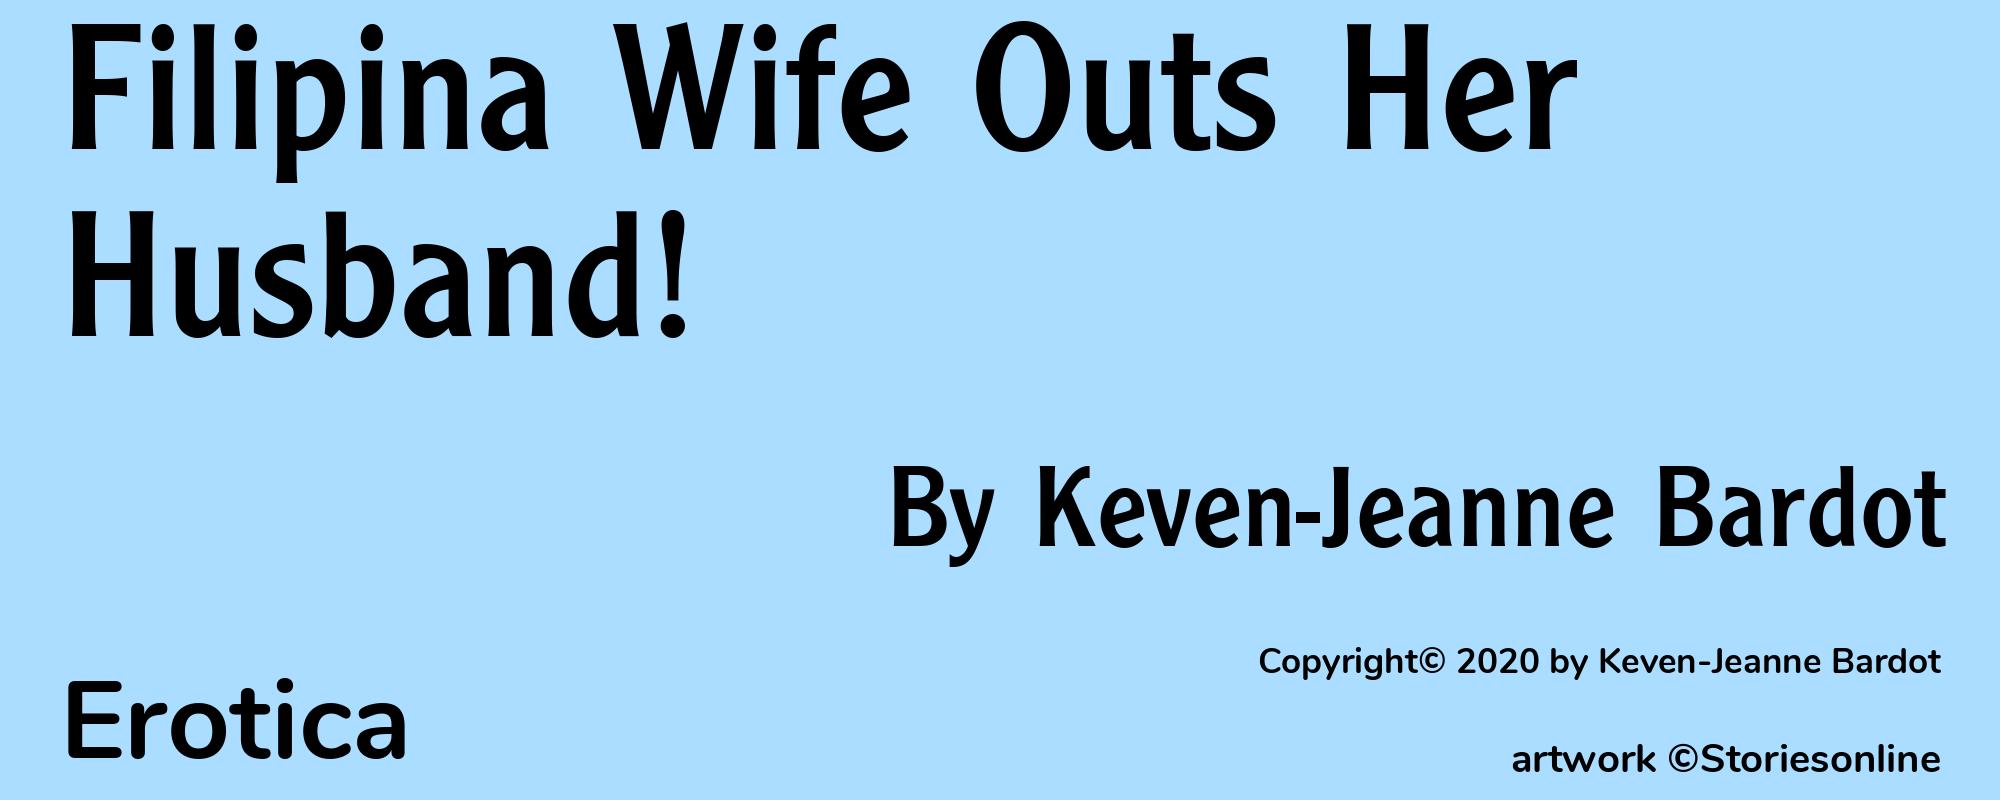 Filipina Wife Outs Her Husband! - Cover